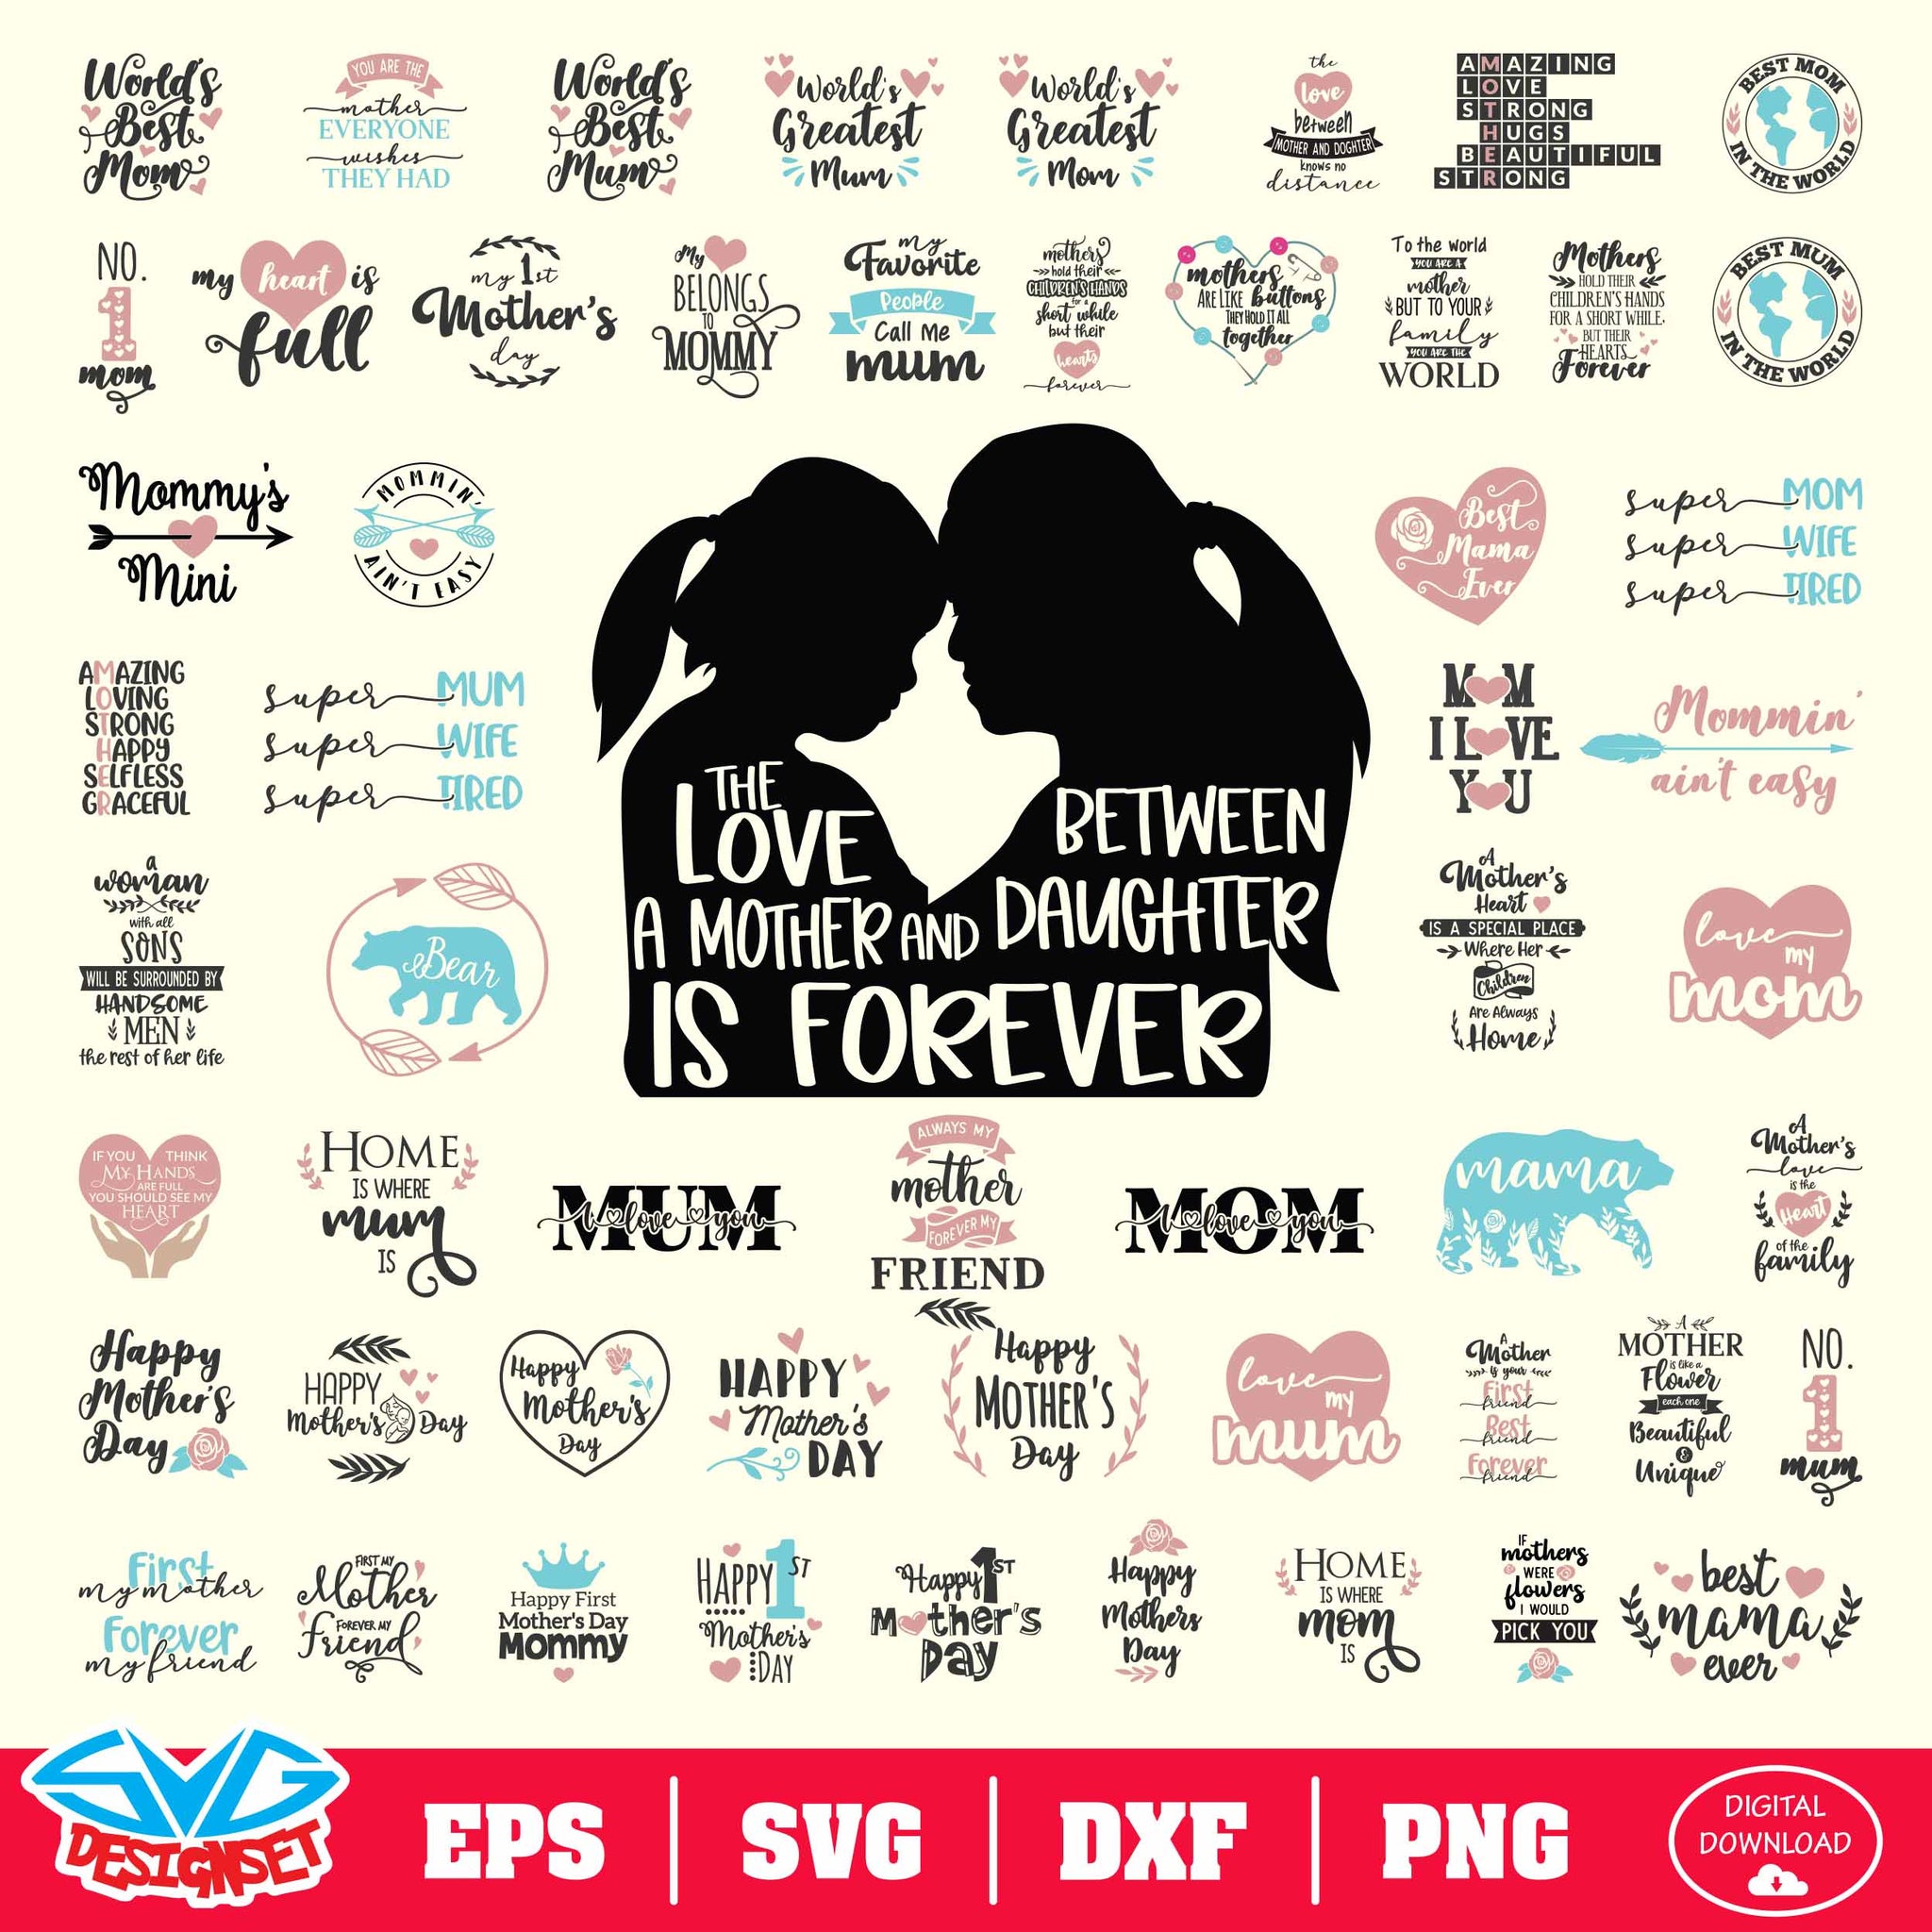 Happy Mother's Day Bundle Svg, Dxf, Eps, Png, Clipart, Silhouette and Cutfiles #7 - SVGDesignSets